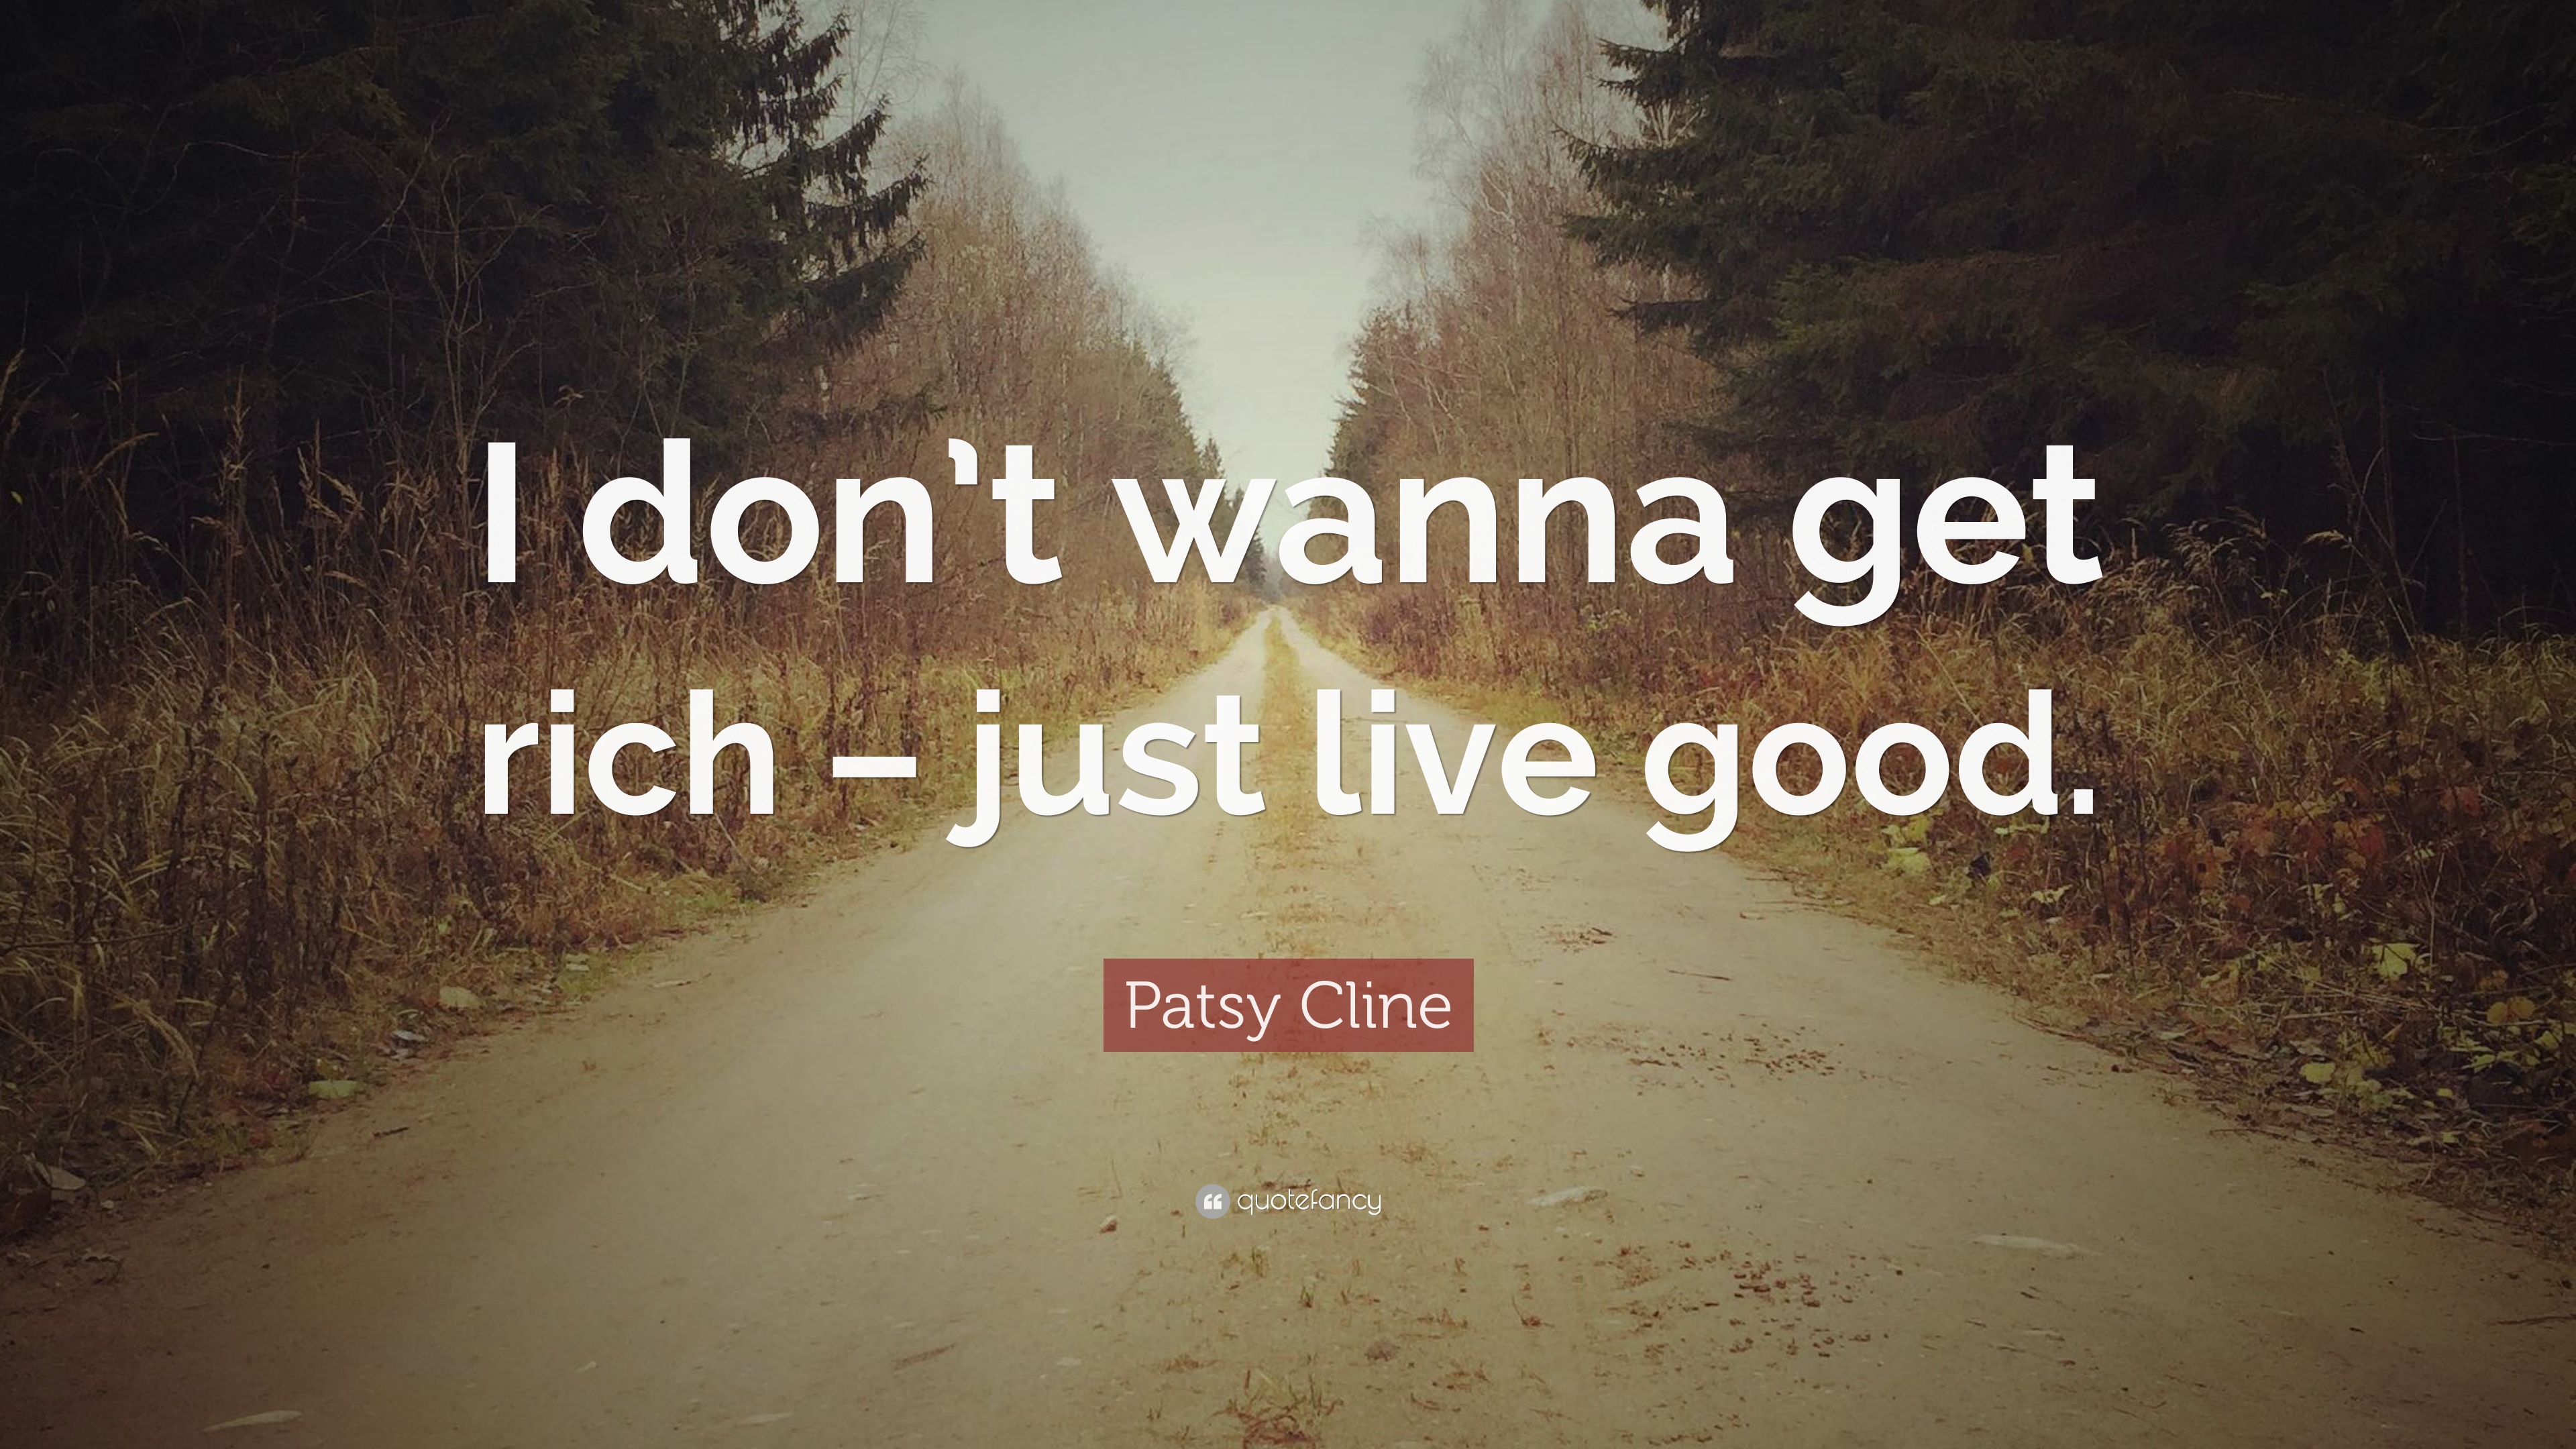 6 Inspirational Patsy Cline Quotes